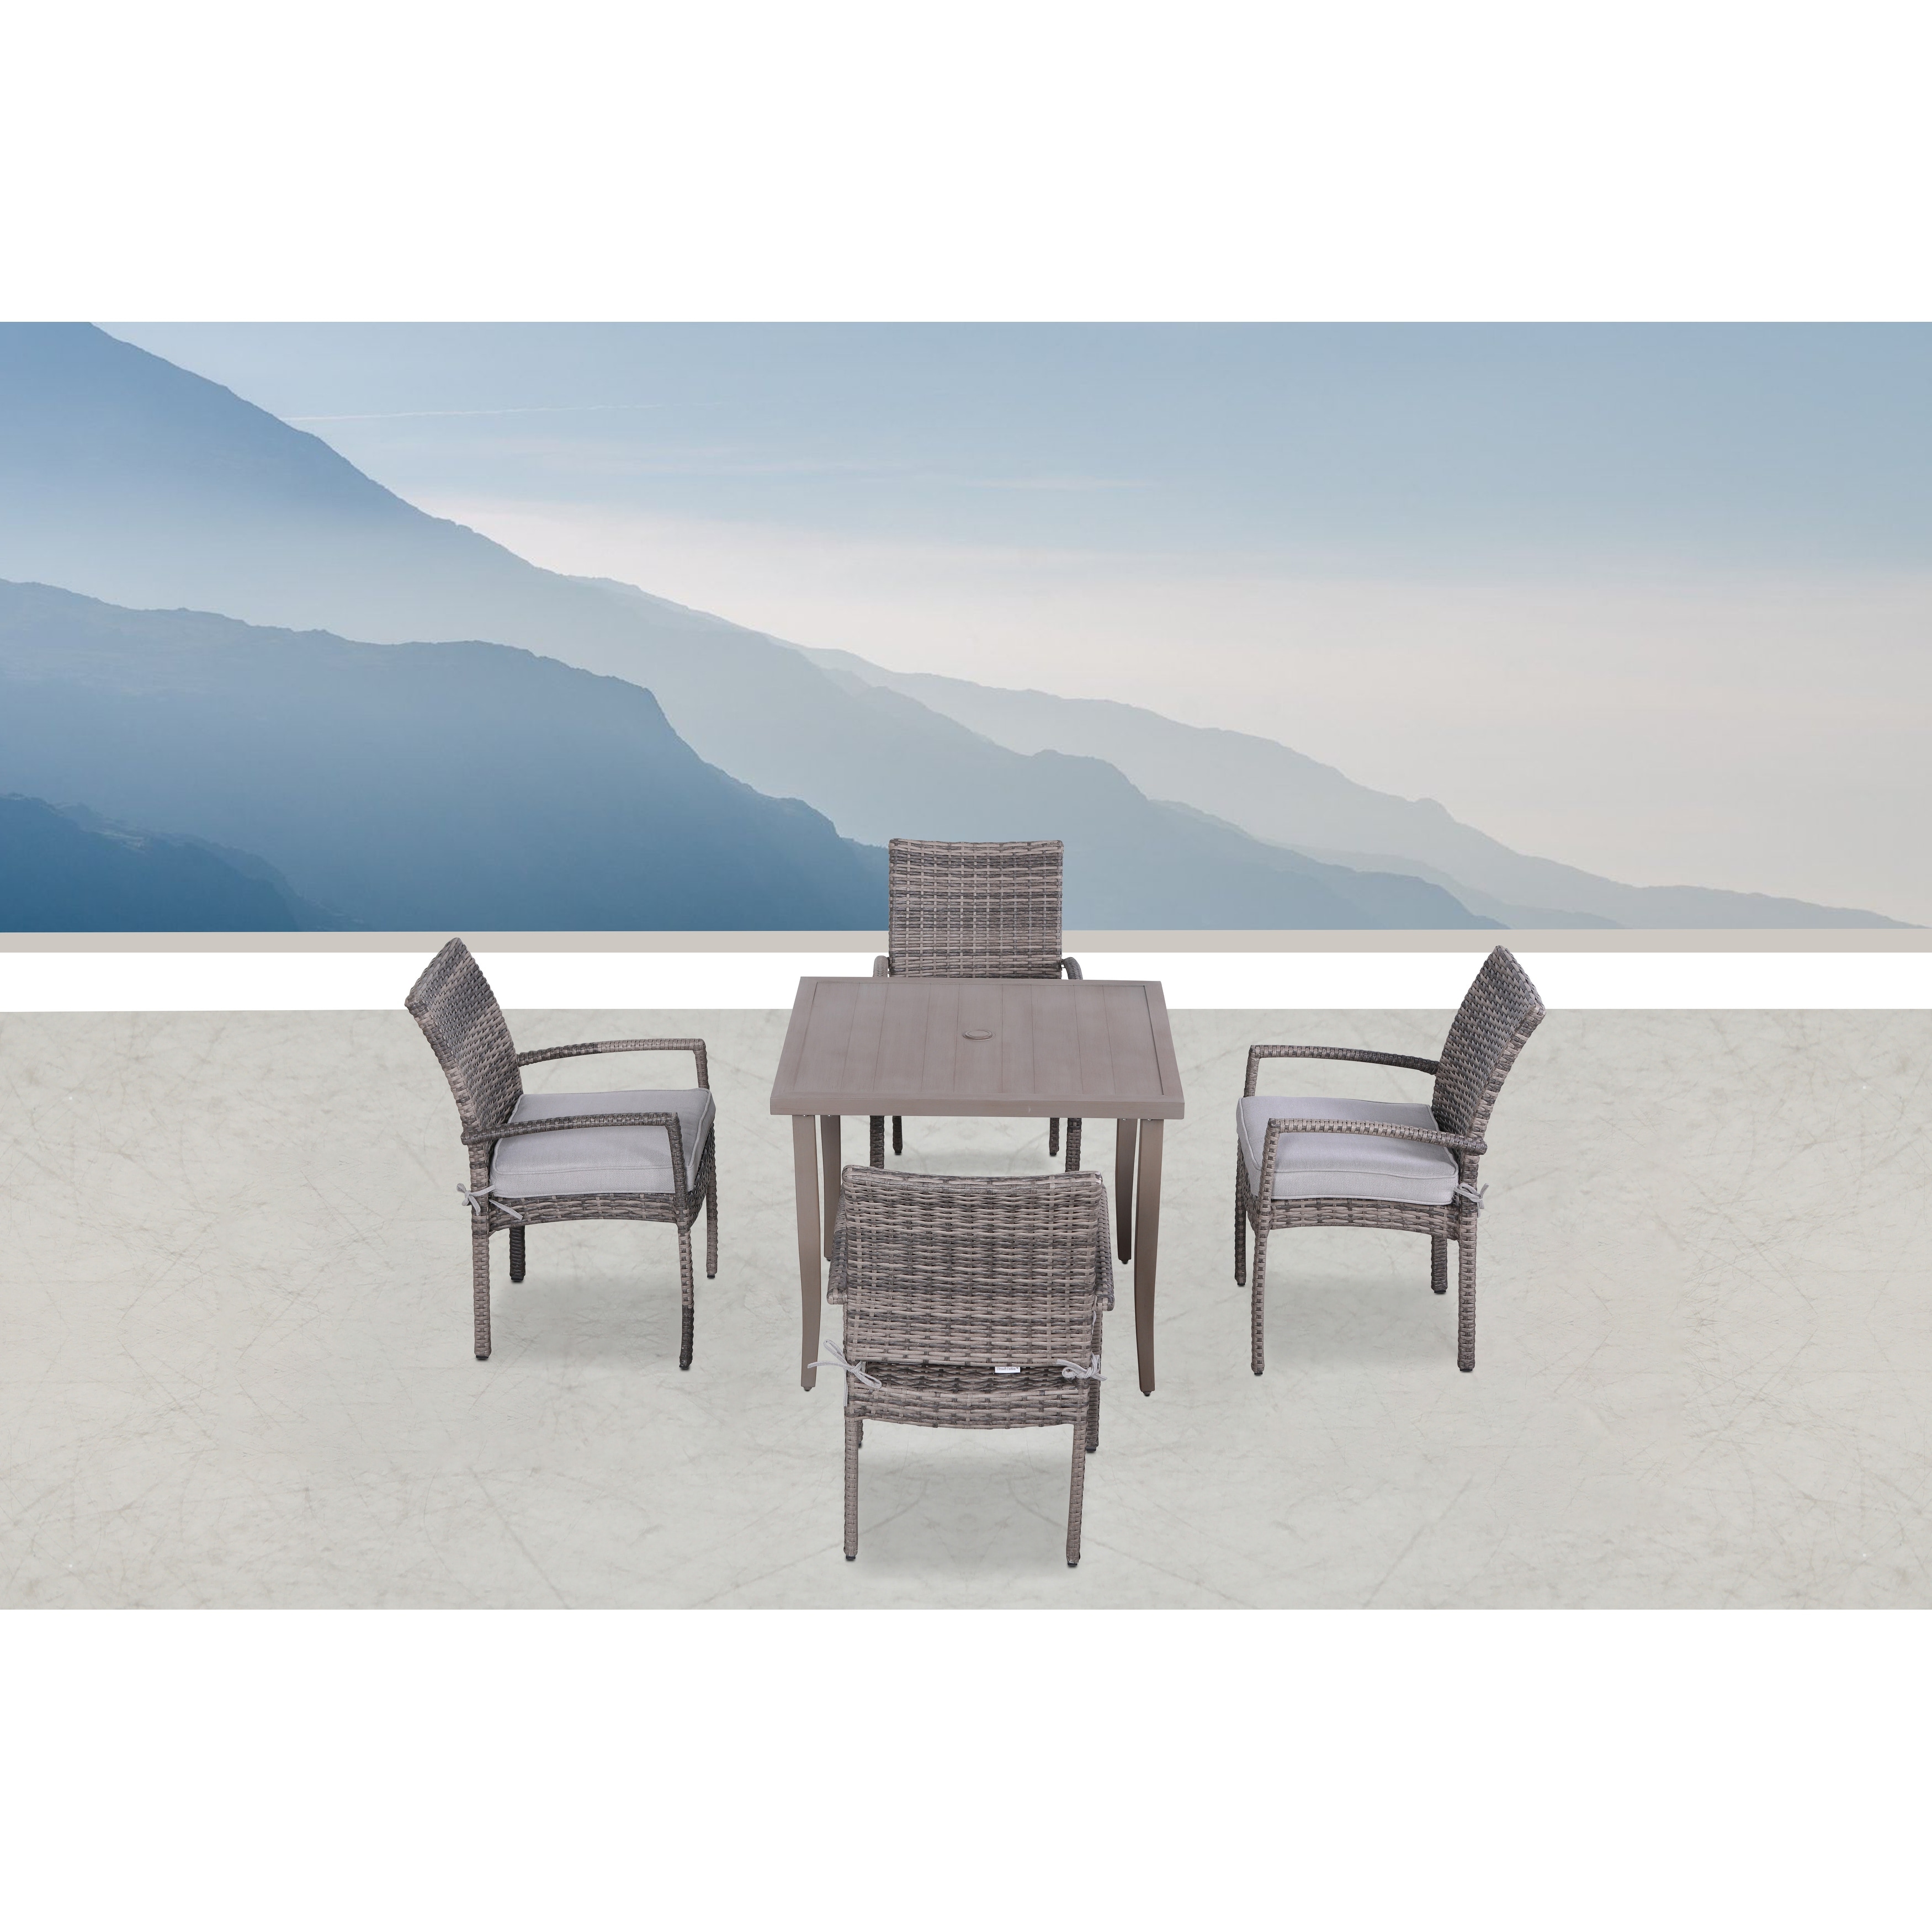 Lsi 5 Piece Dining Sets With Chairs And Cushions